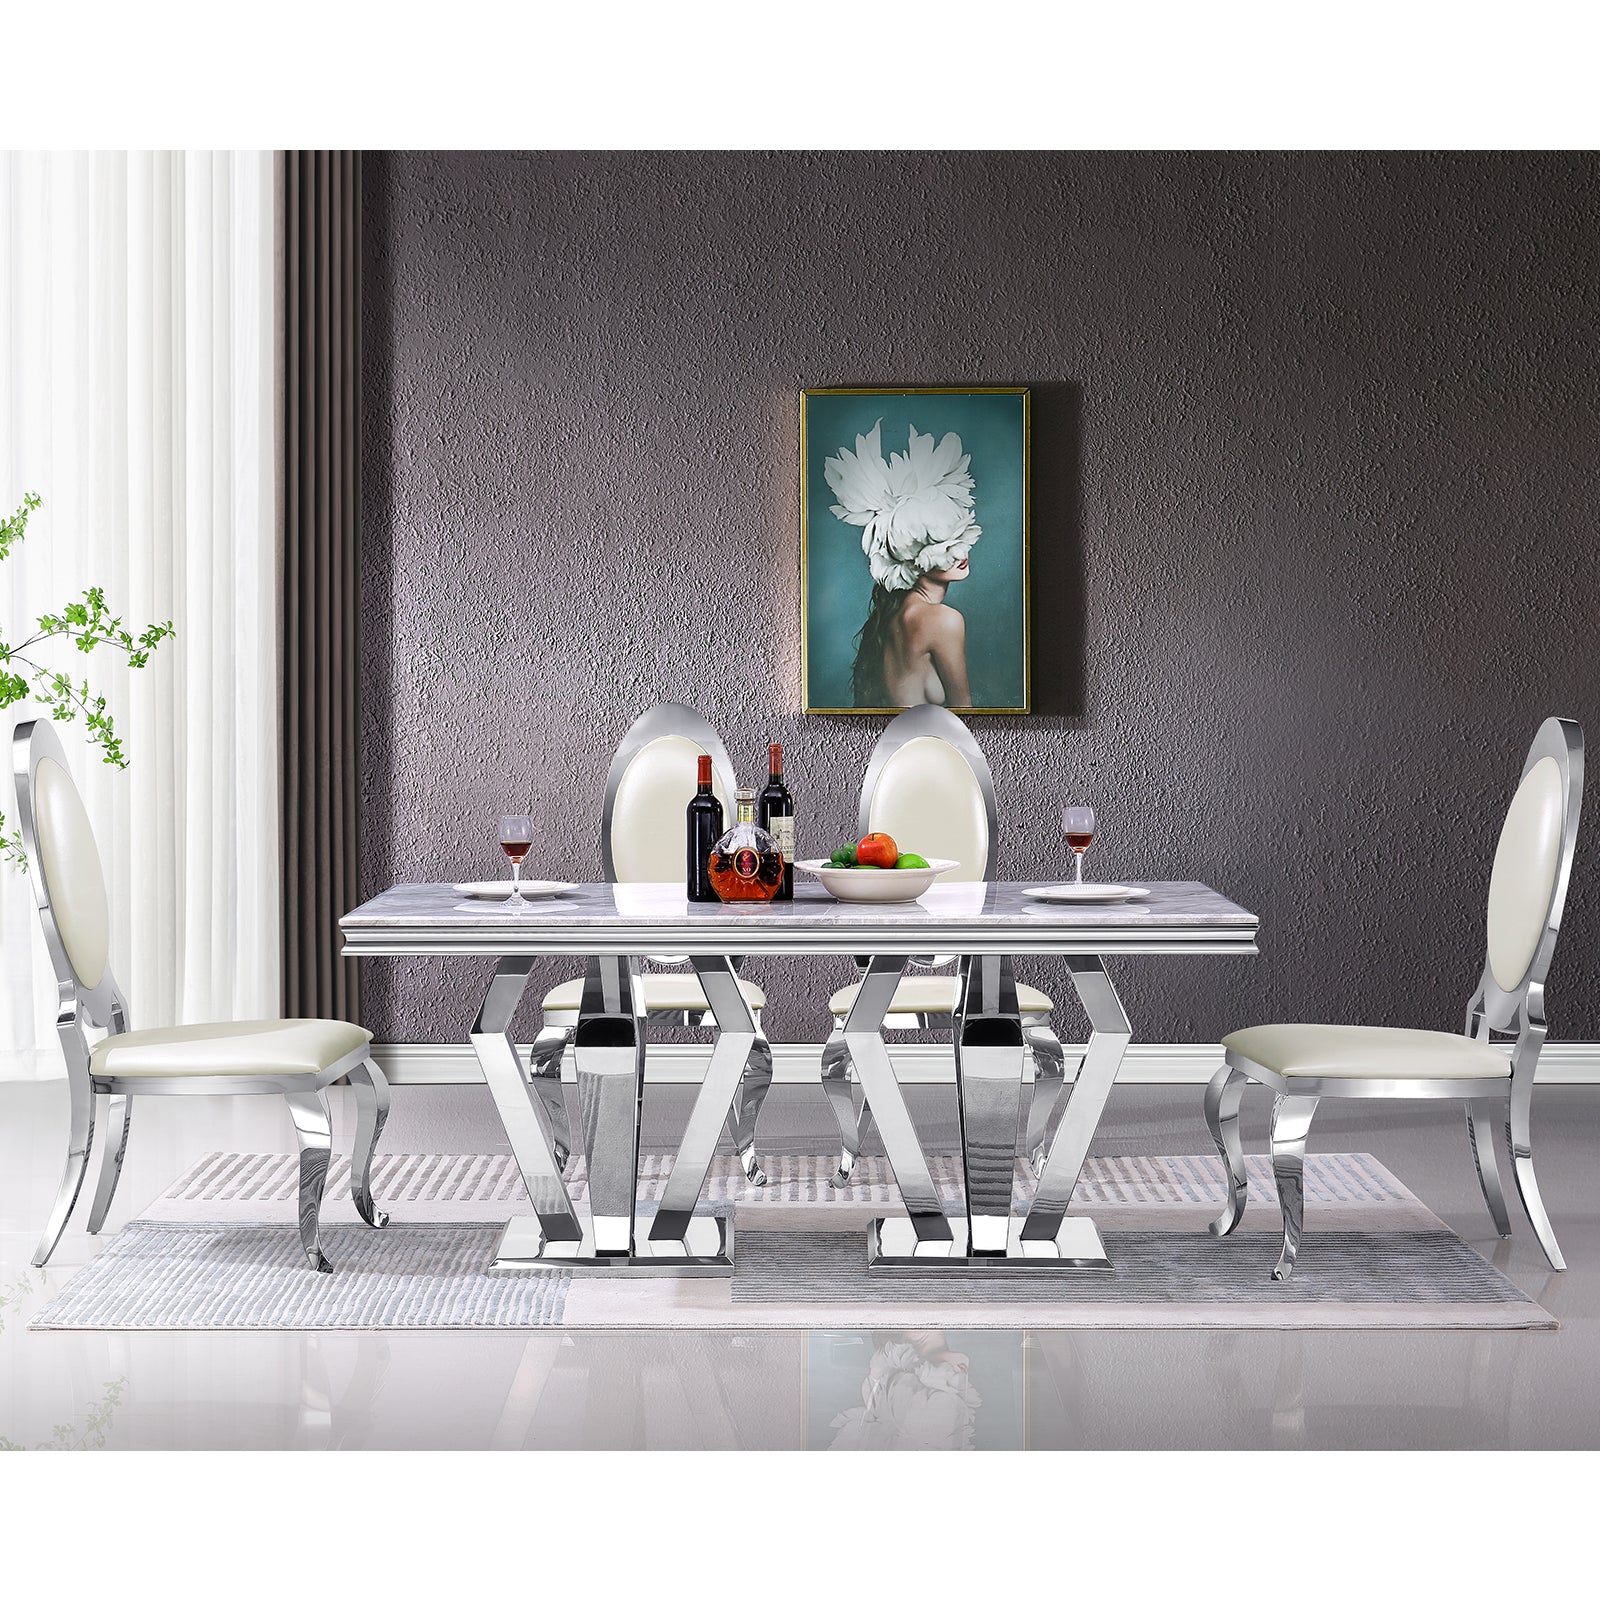 603-Set | AUZ White and Silver Dining room Sets for 6